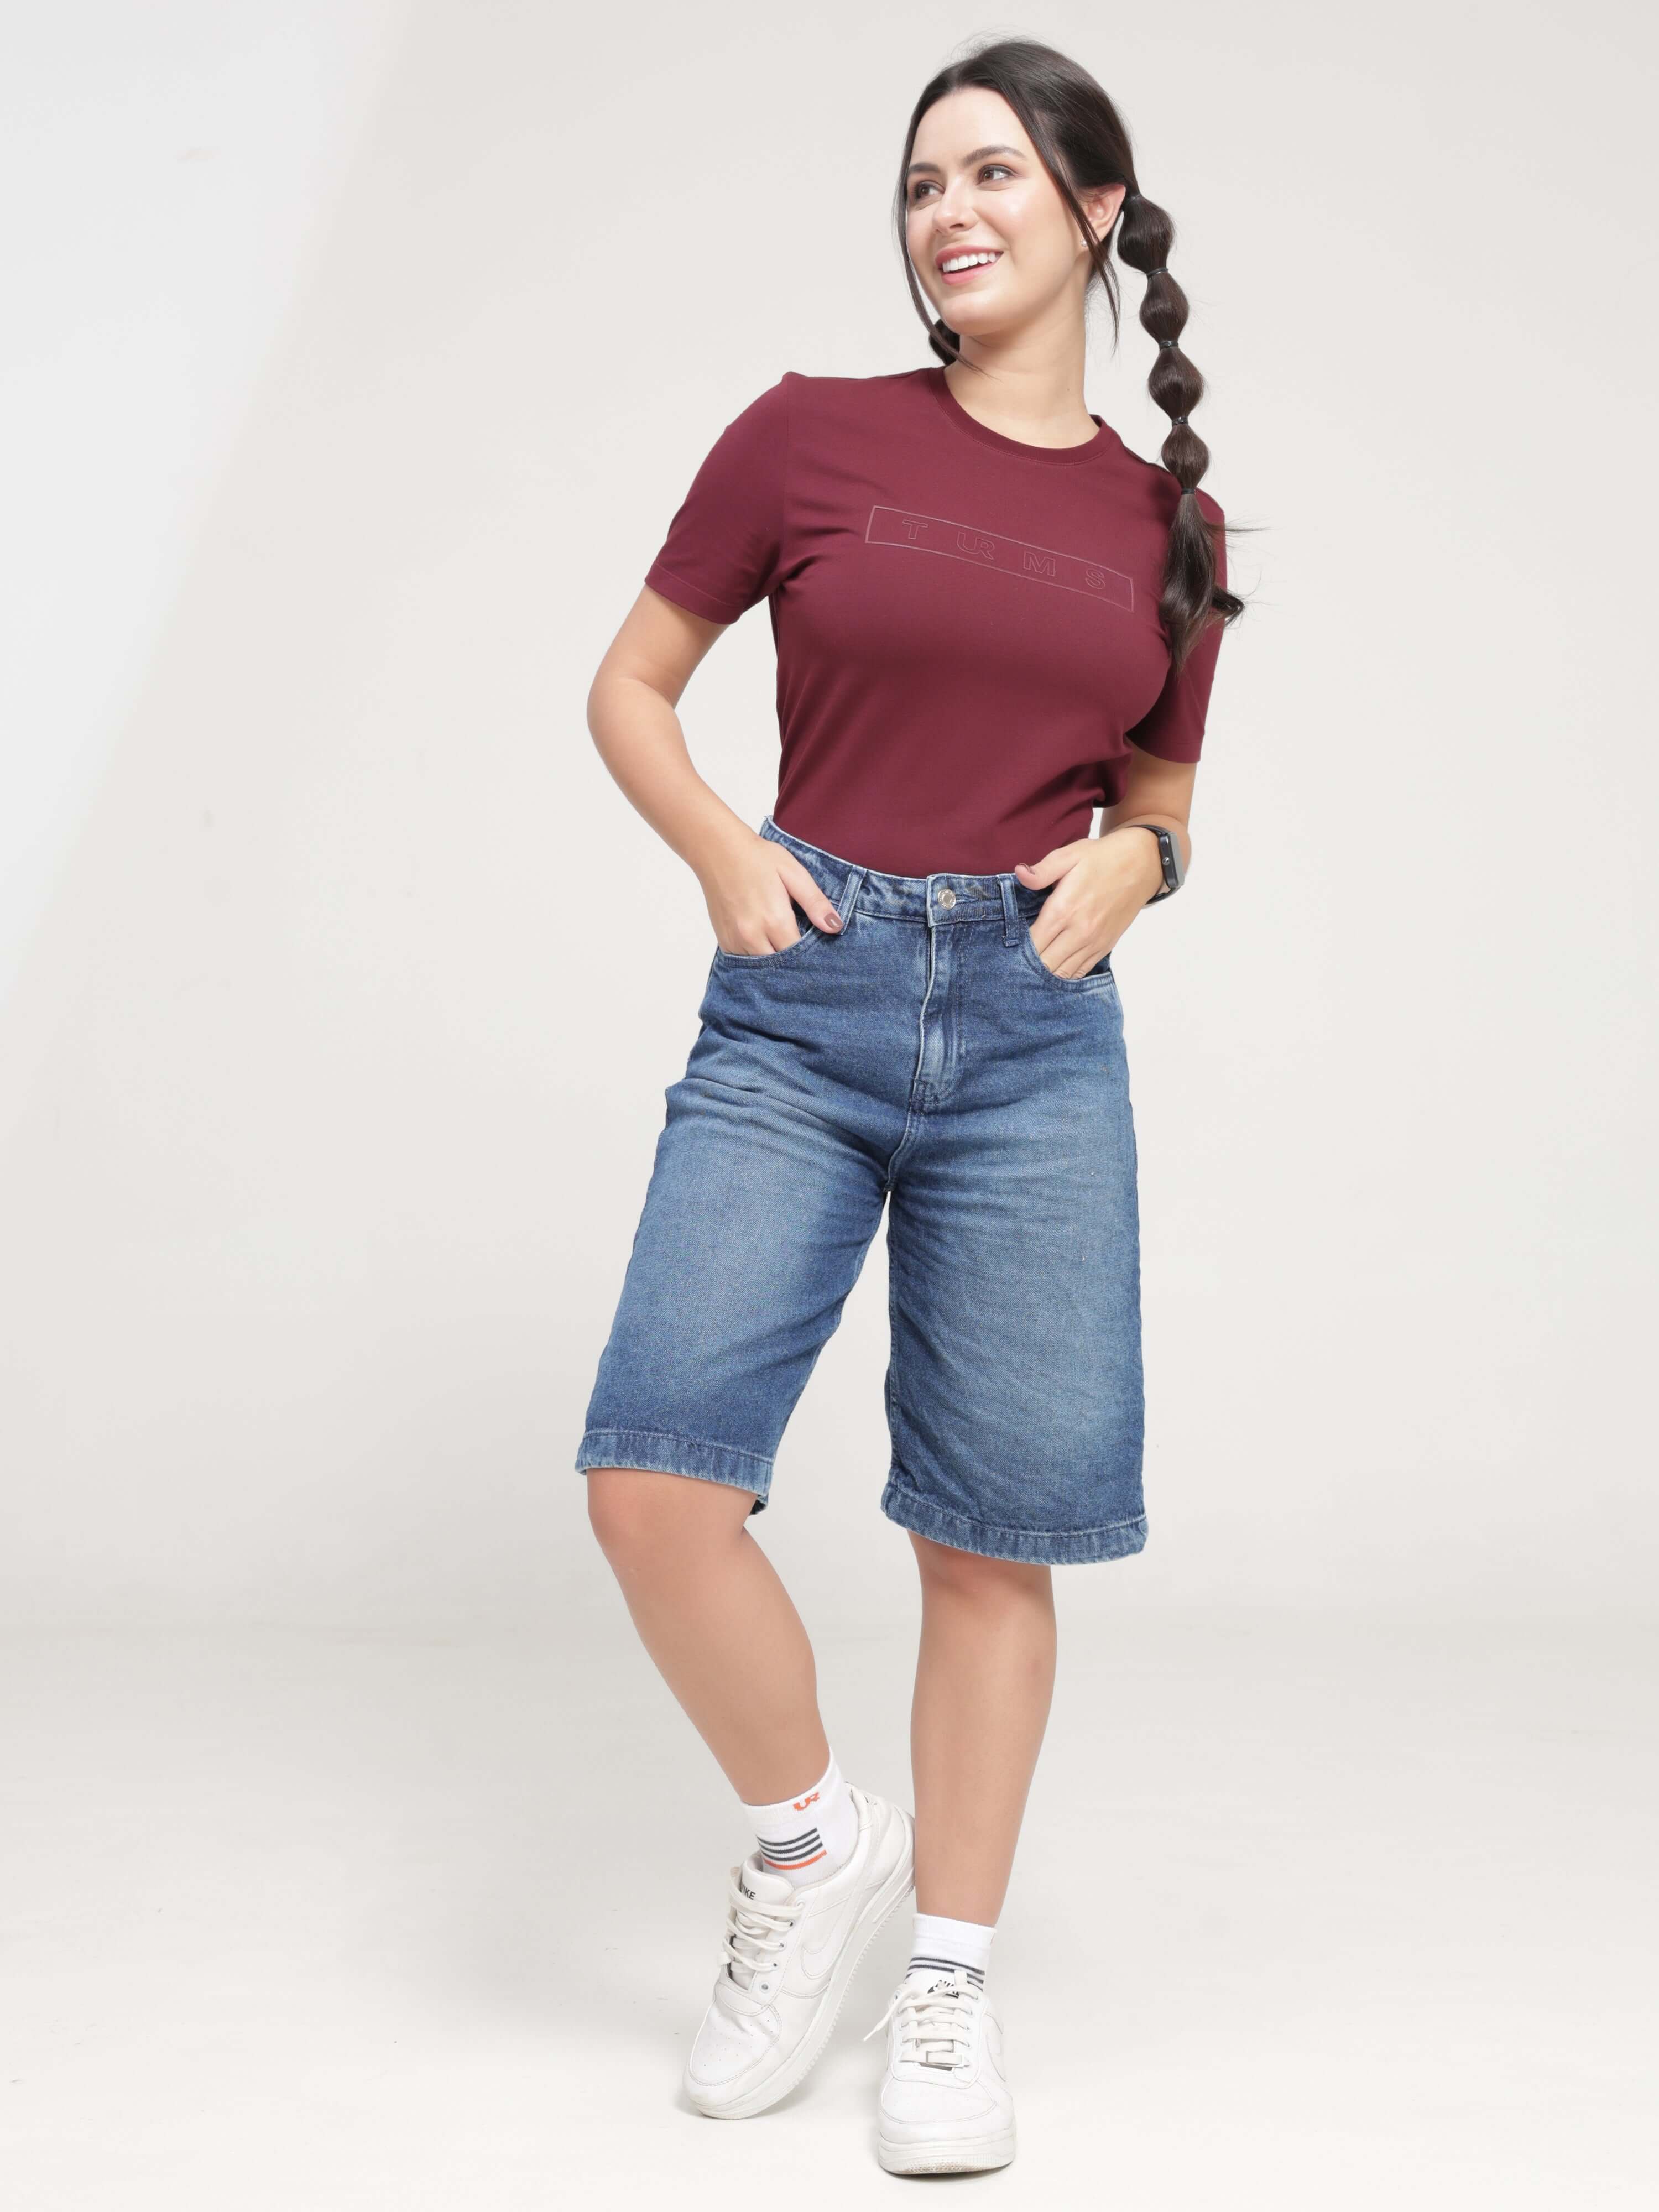 Woman wearing Burgundy Elite anti-stain, anti-odour, stretchable round-neck Turms T-shirt with denim shorts, best intelligent apparel for women.